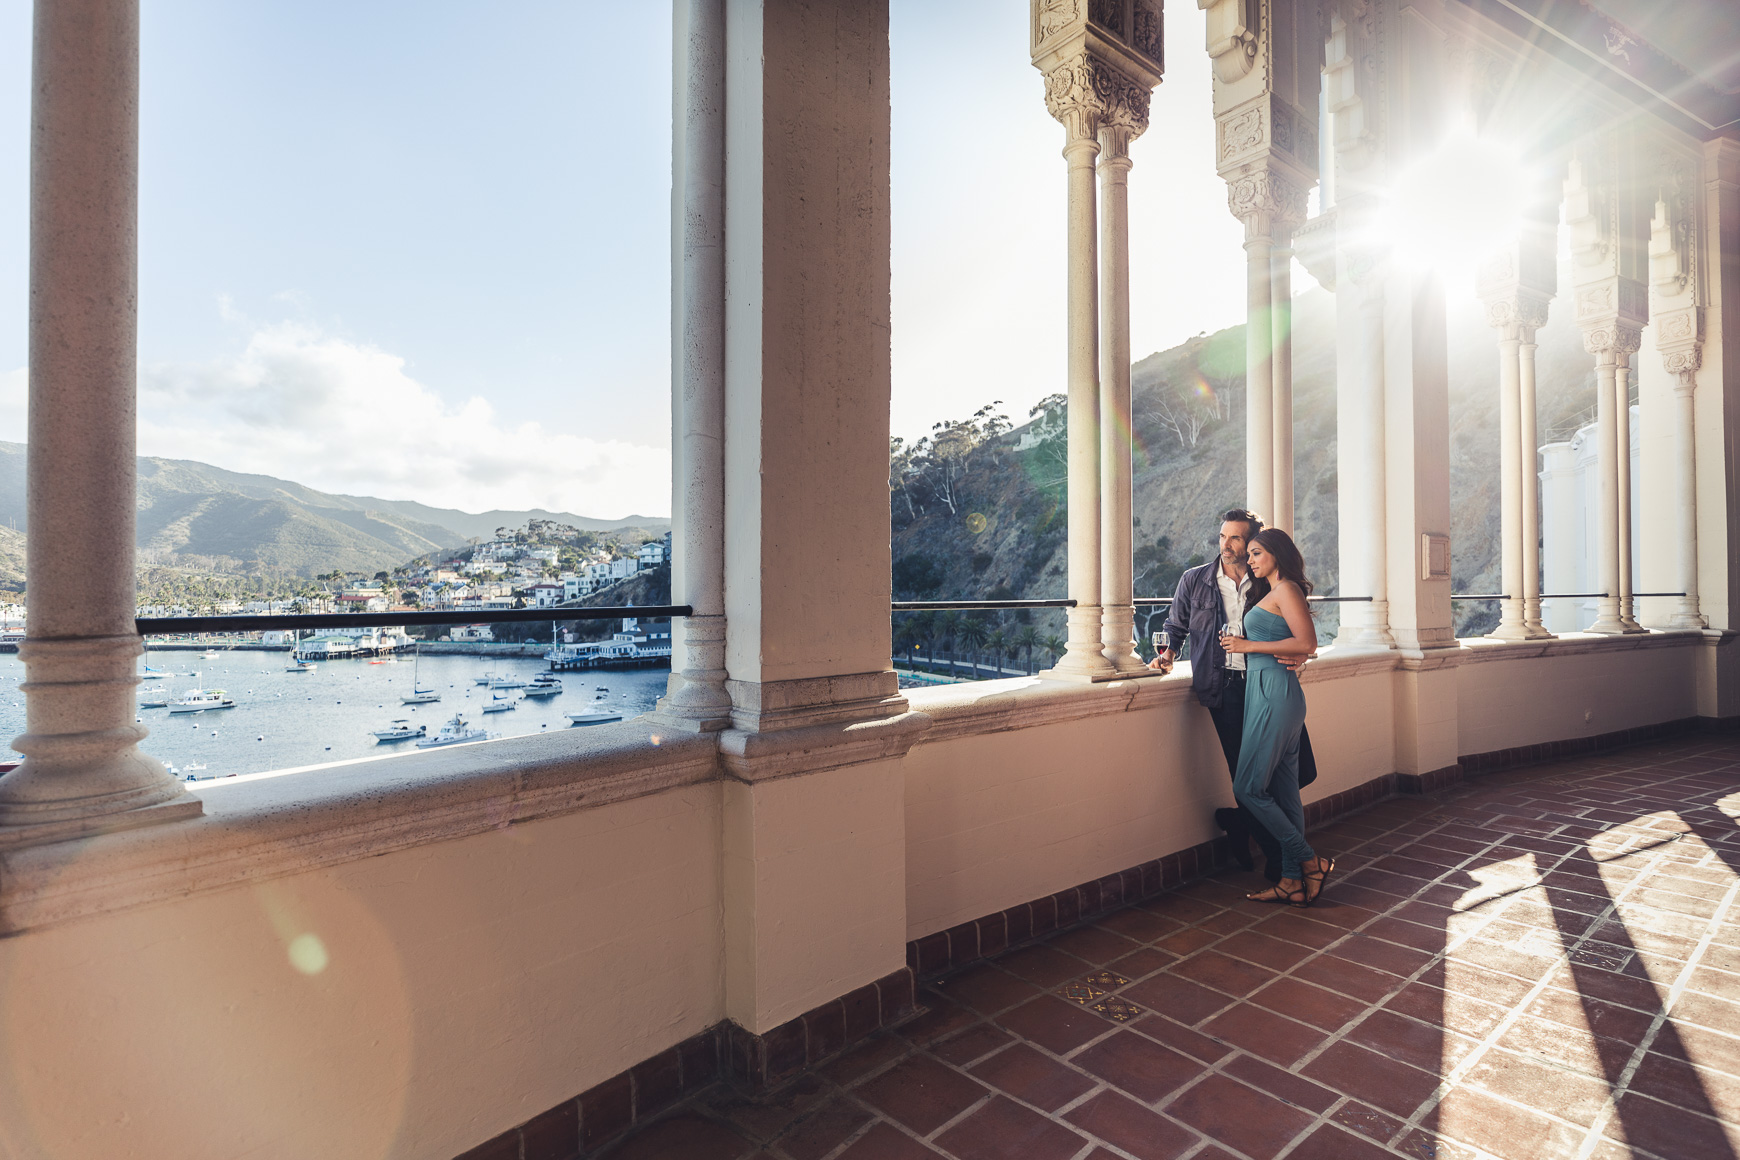 Catalina Island Tourism | Visit Catalina Lifestyle and Tourism Advertising Campaign | Michael Kunde Photo